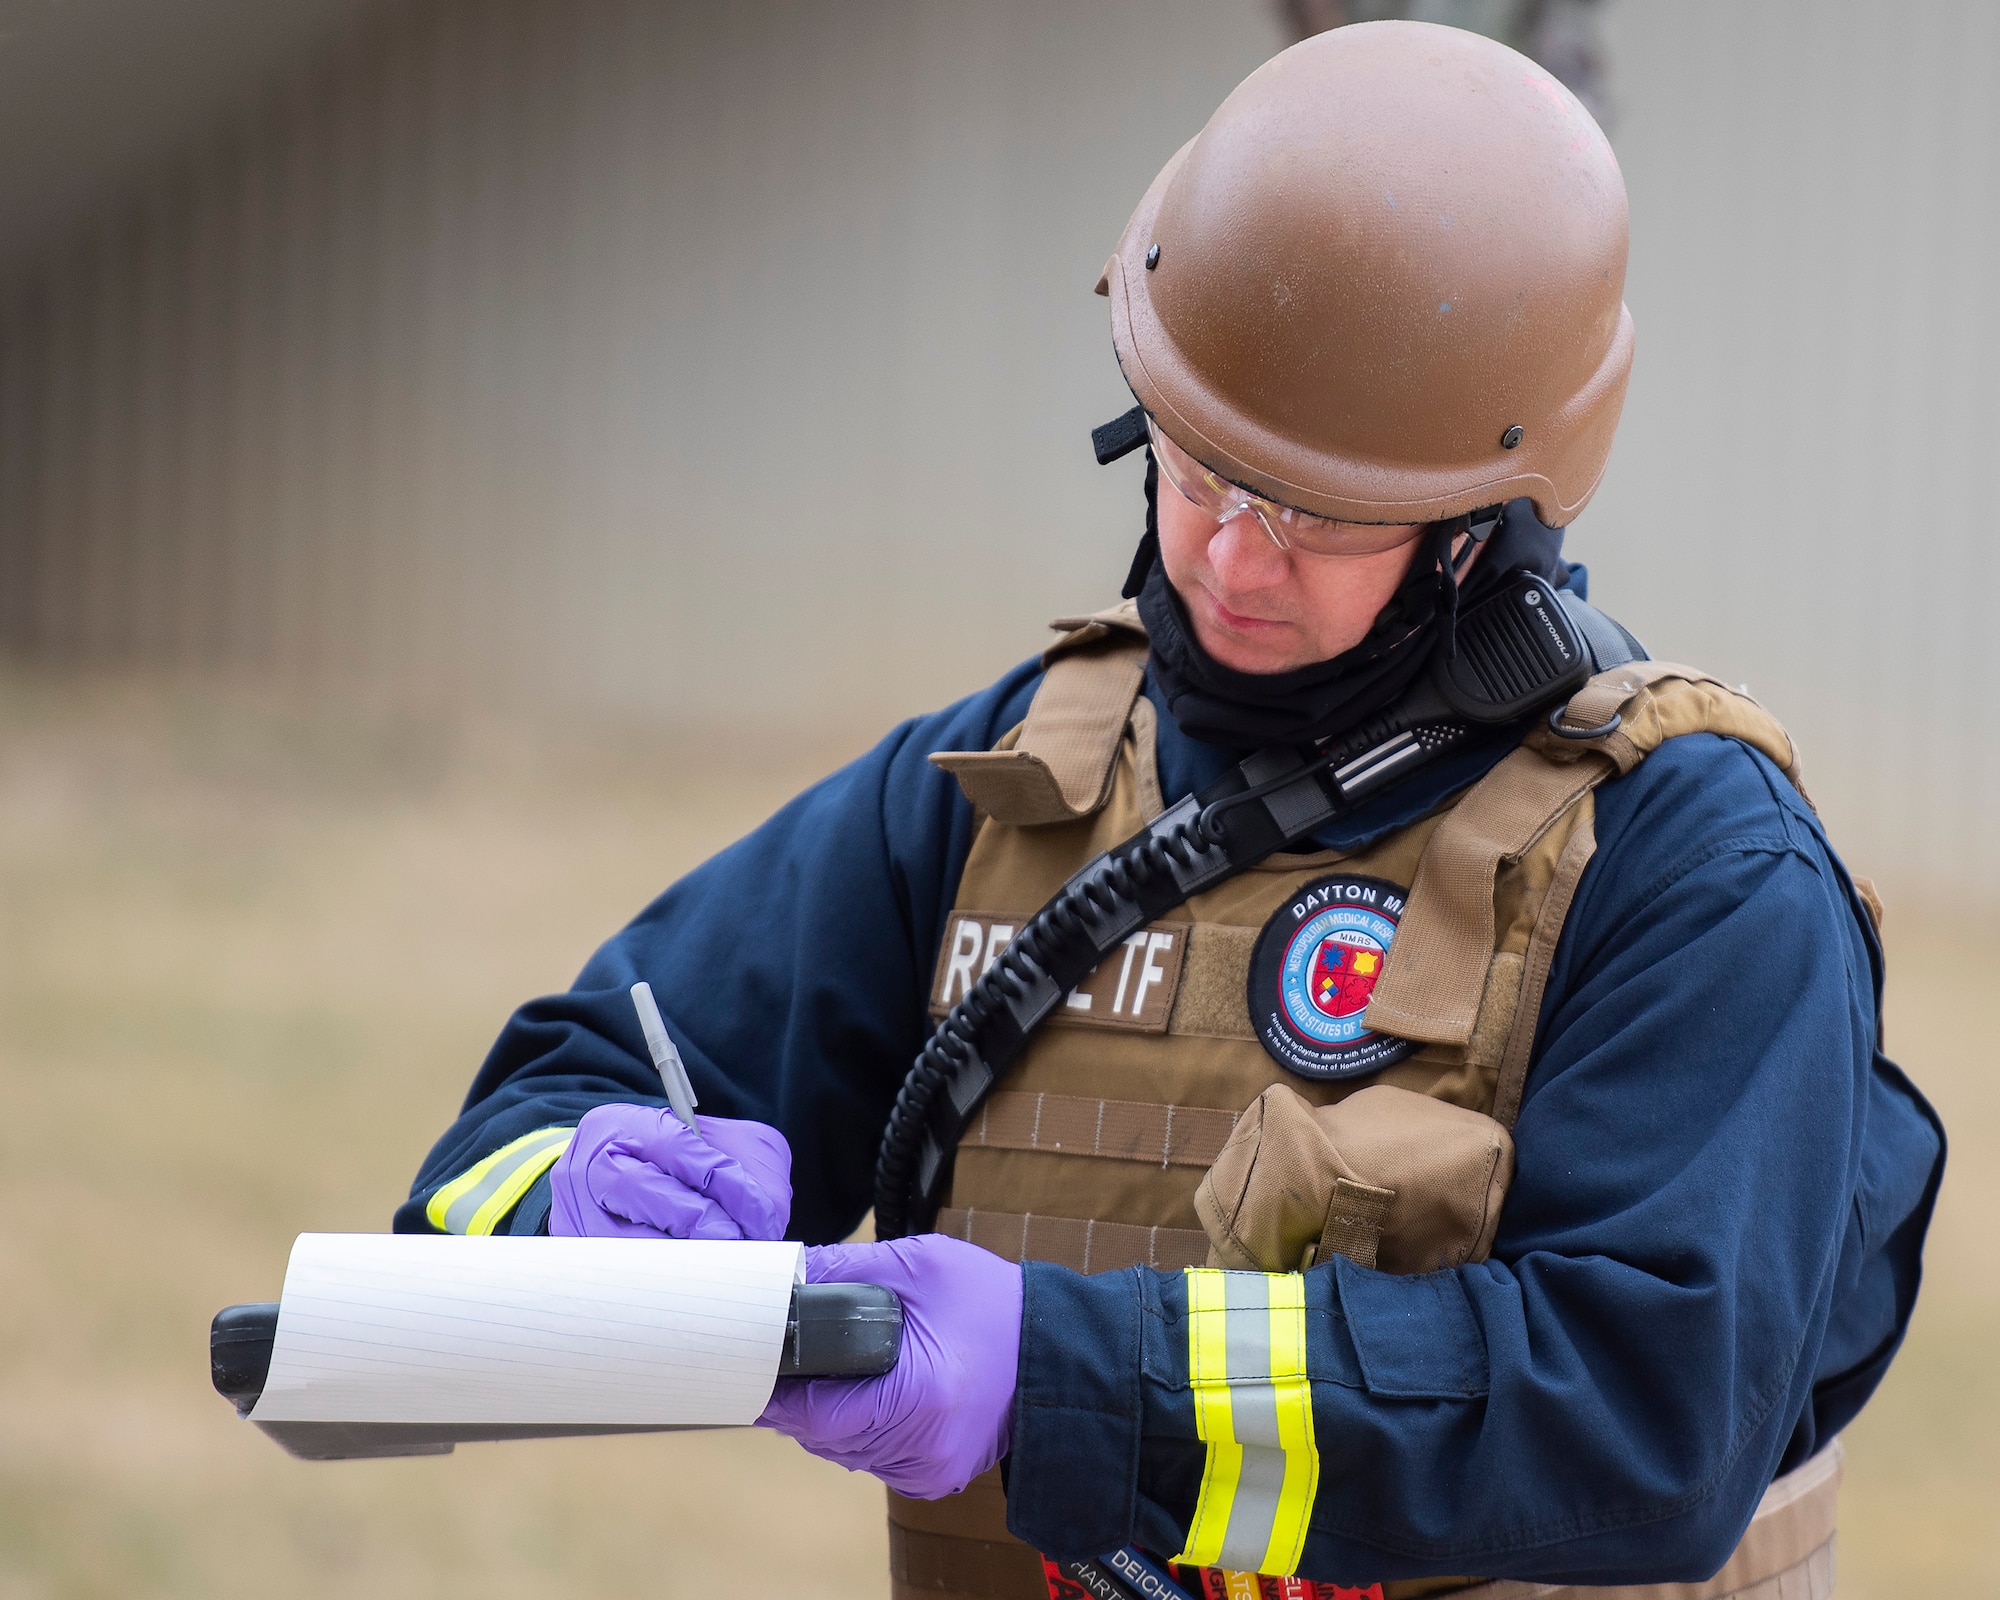 A Fire Department paramedic with the 788th Civil Engineer Squadron keeps track of the “dead” and “wounded” during an active-shooter exercise Feb. 23, 2022, at Wright-Patterson Air Force Base, Ohio. The exercise gave first responders, including police, fire and medical personnel, the opportunity to practice coordinating emergency actions and procedures. (U.S. Air Force photo by R.J. Oriez)